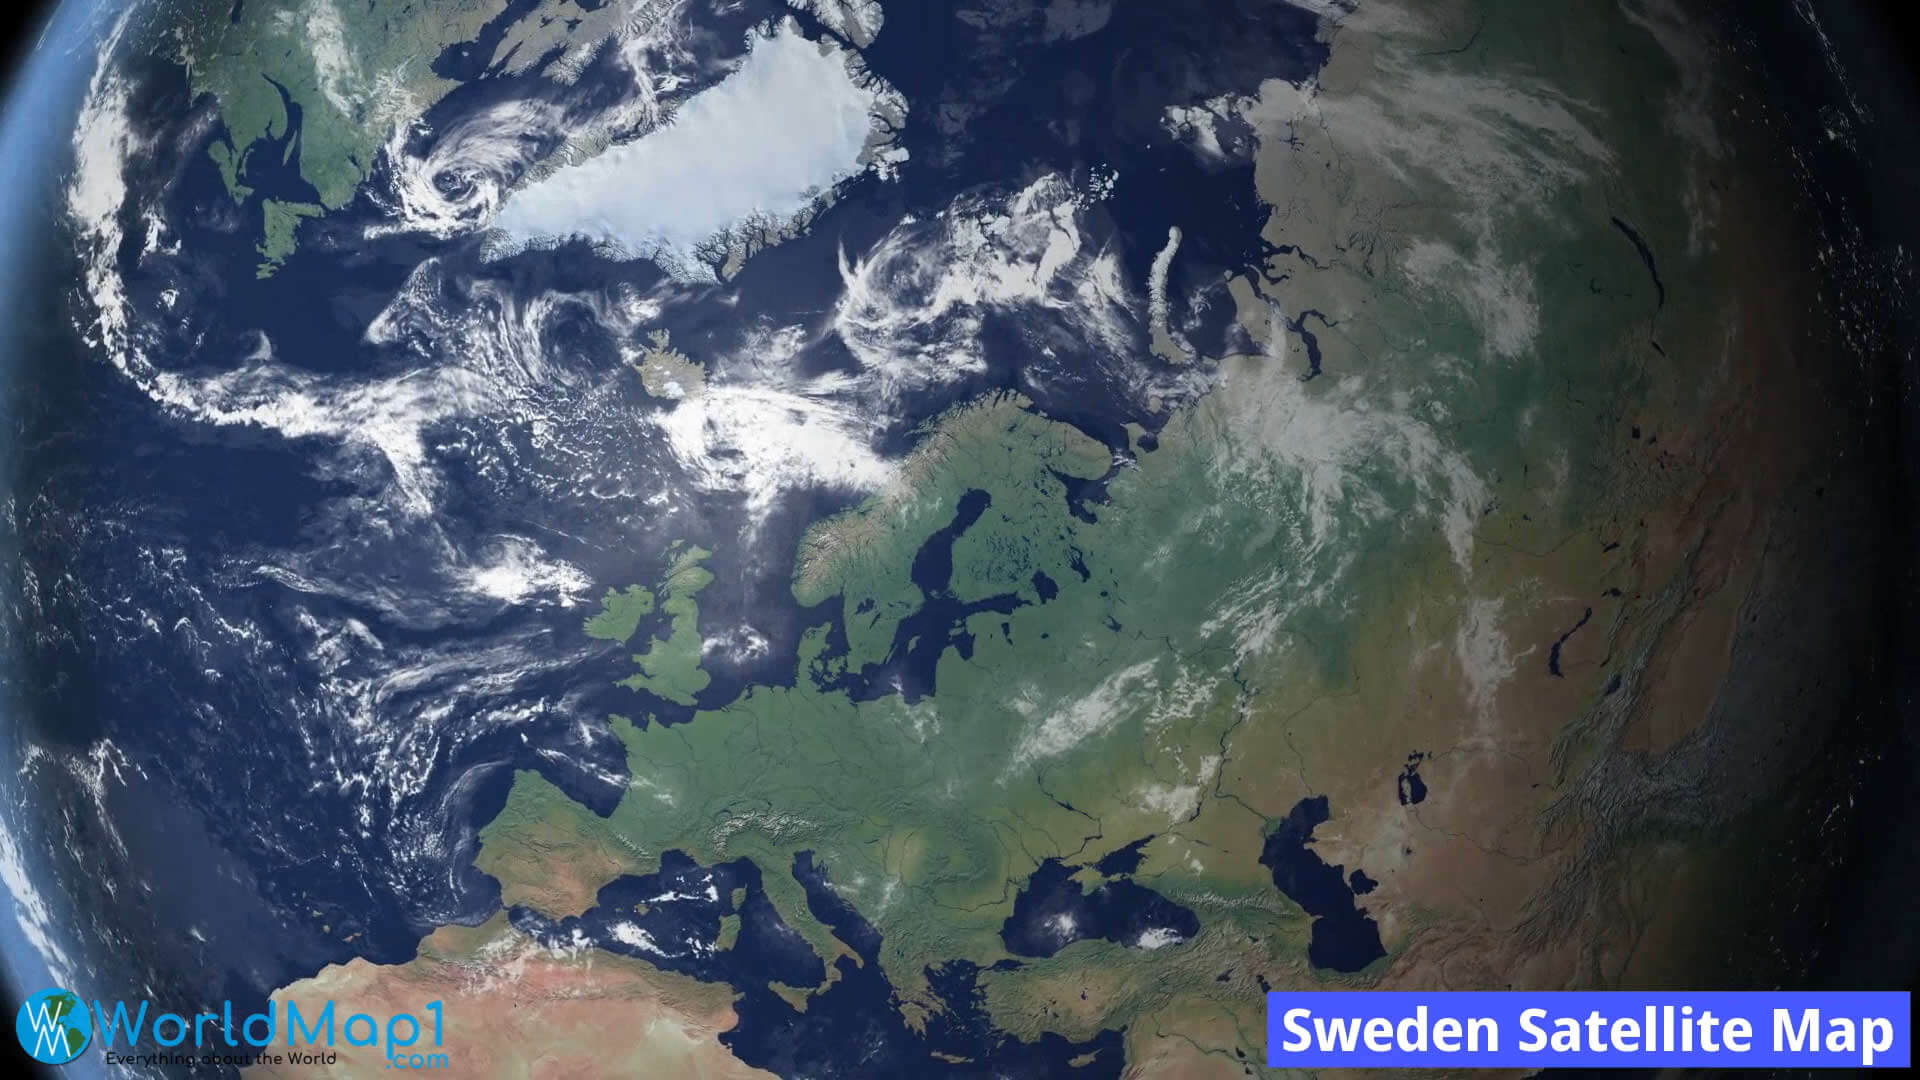 Sweden Satellite View from Space